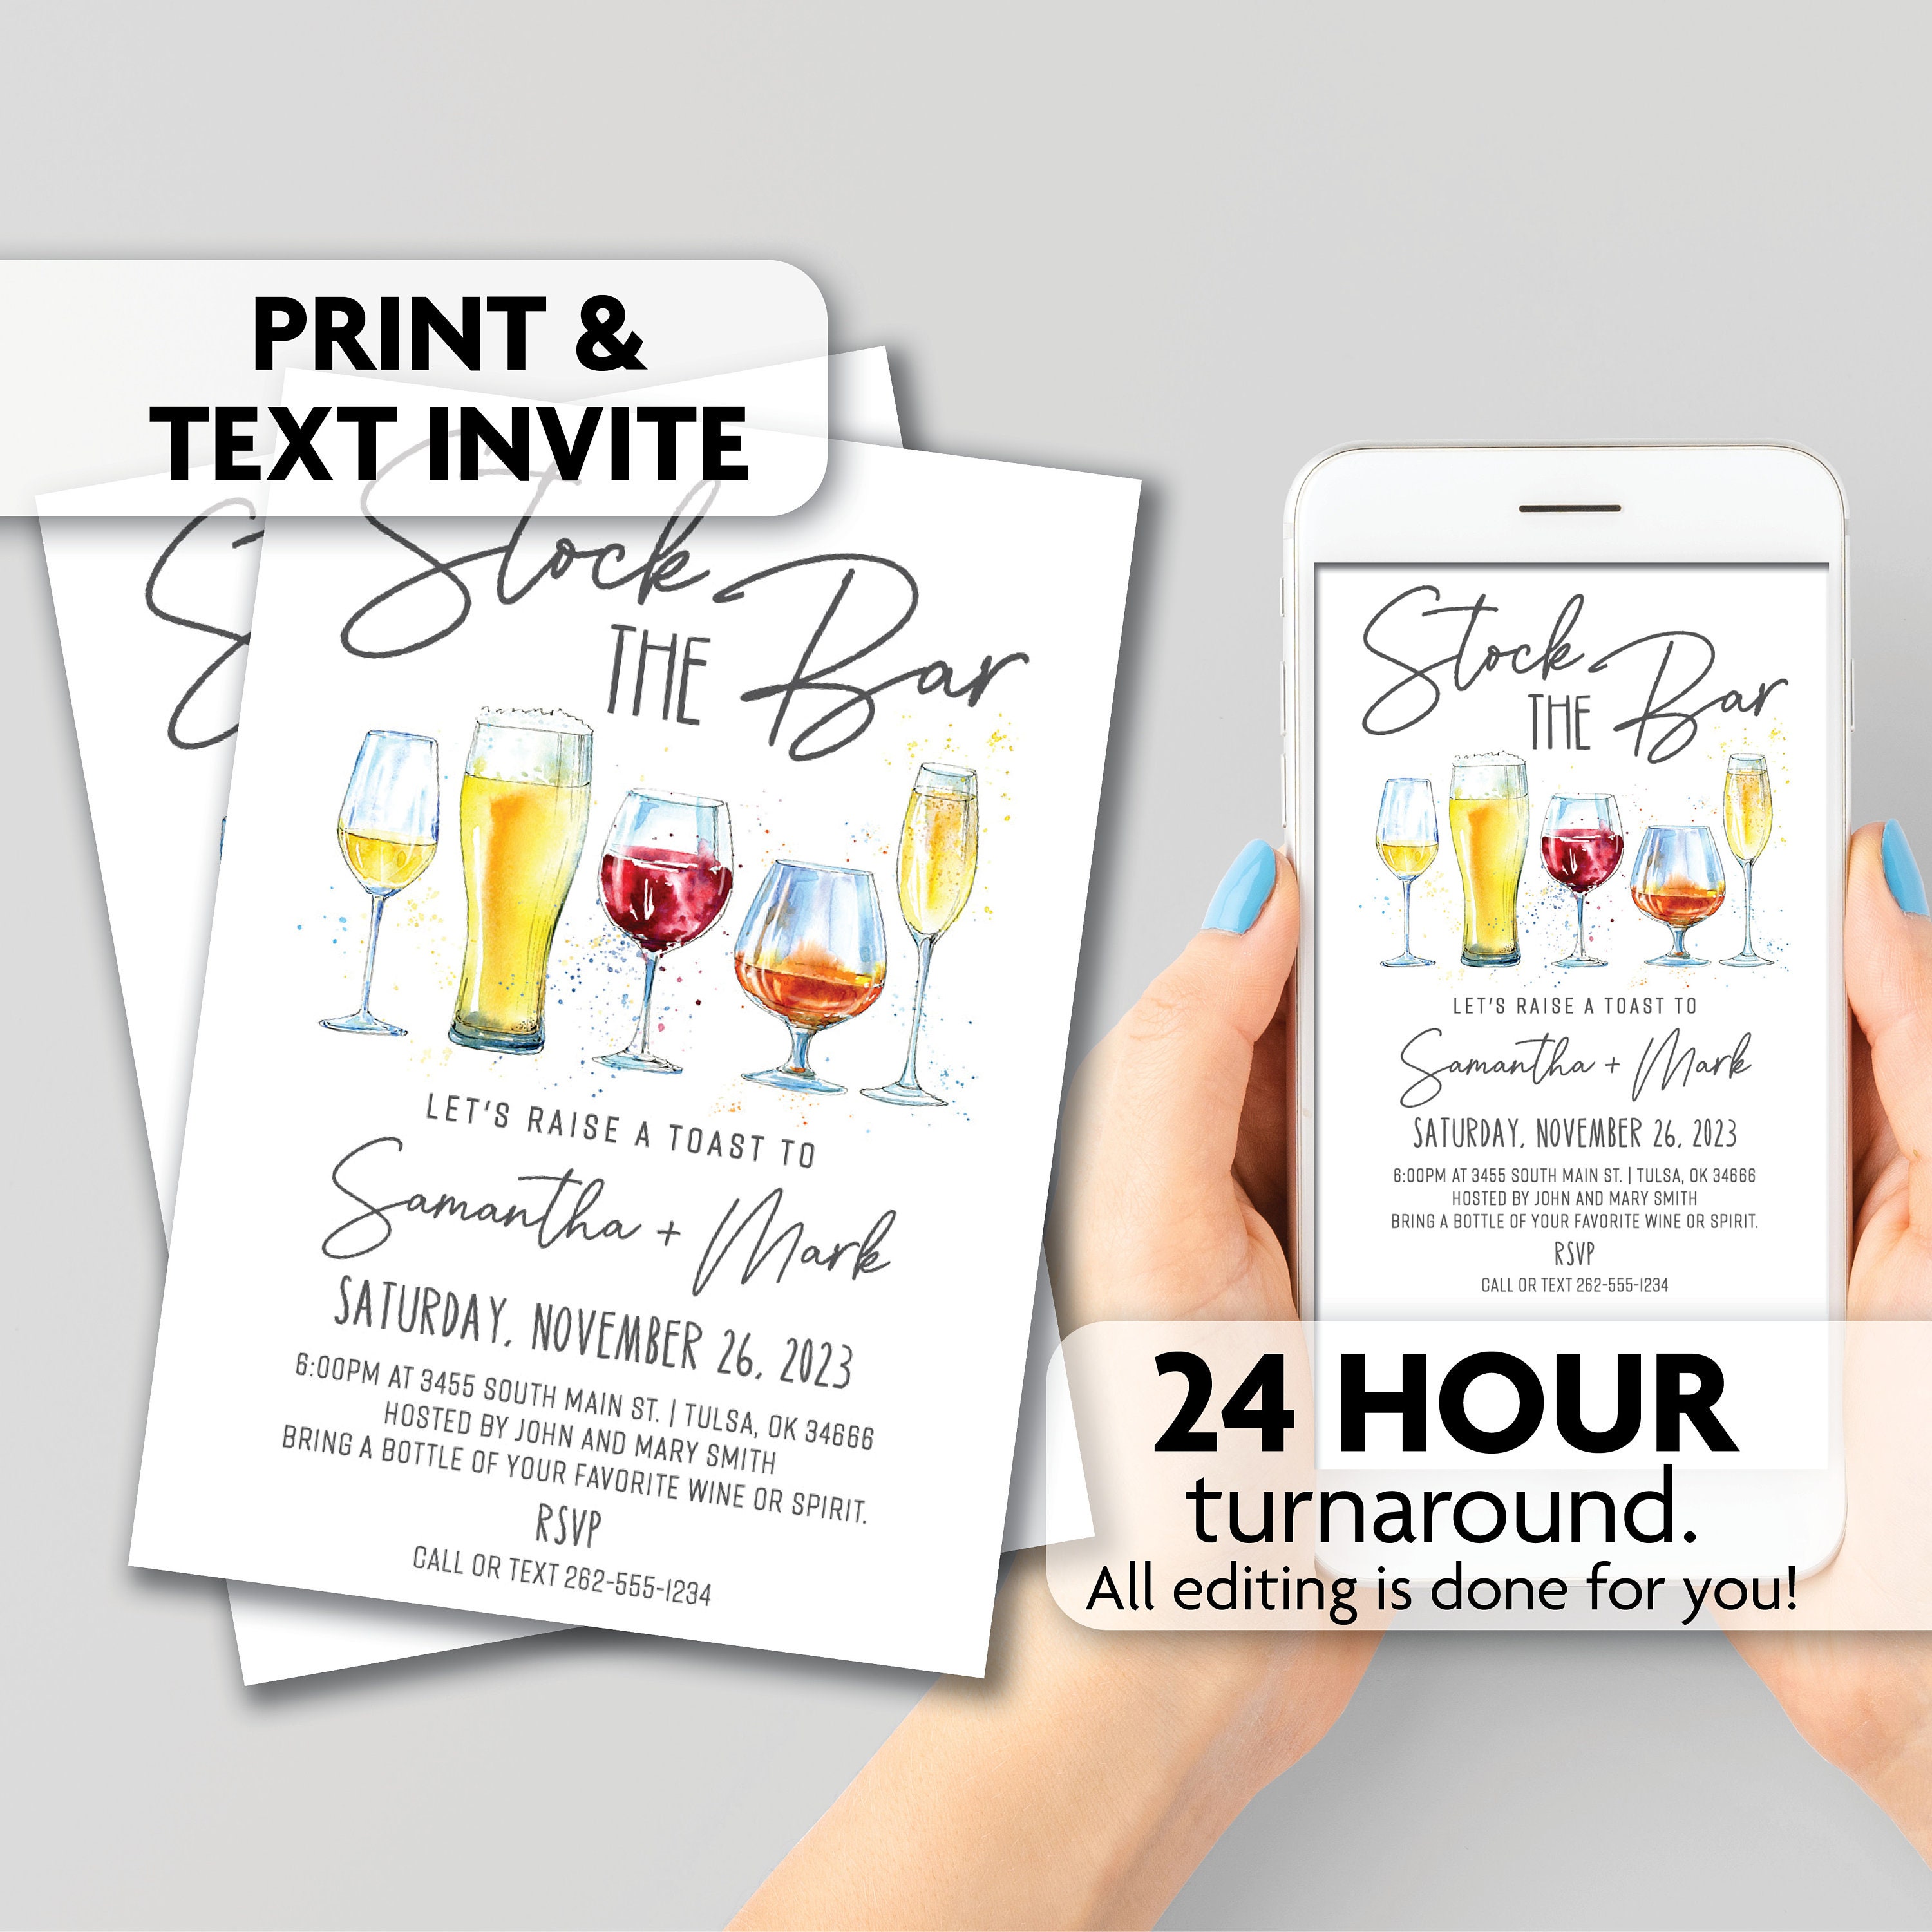 Stock the Bar Invitations Print Text or Email Invite image